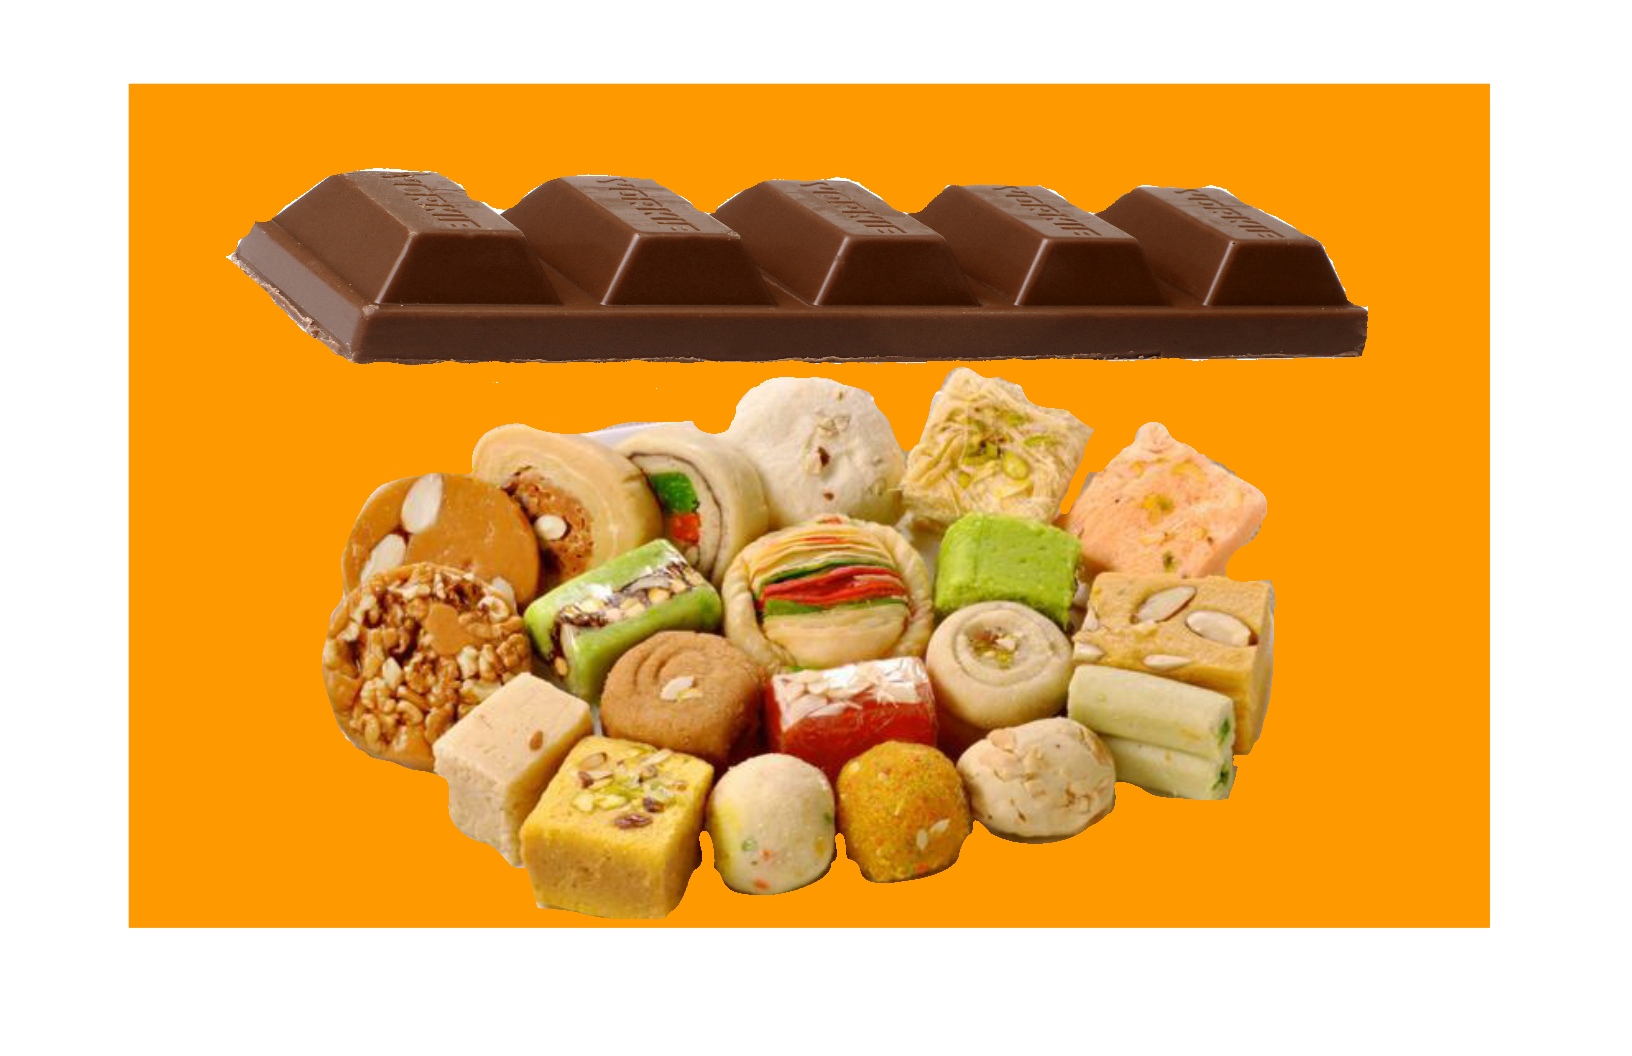 Chocolate and Indian Rainbow-colored Sweets